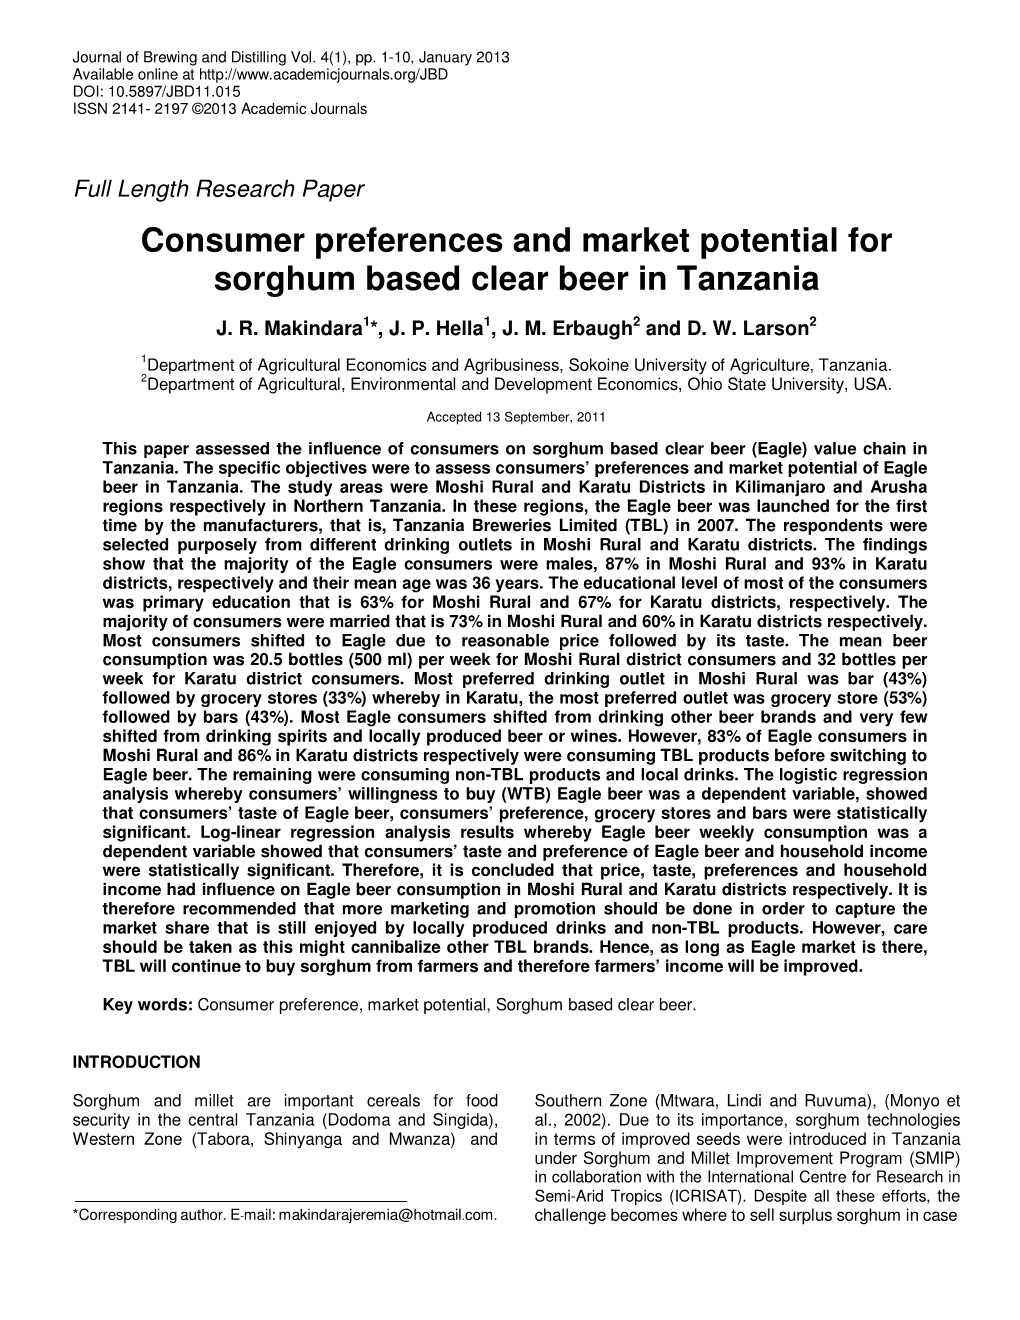 Consumer Preferences and Market Potential for Sorghum Based Clear Beer in Tanzania